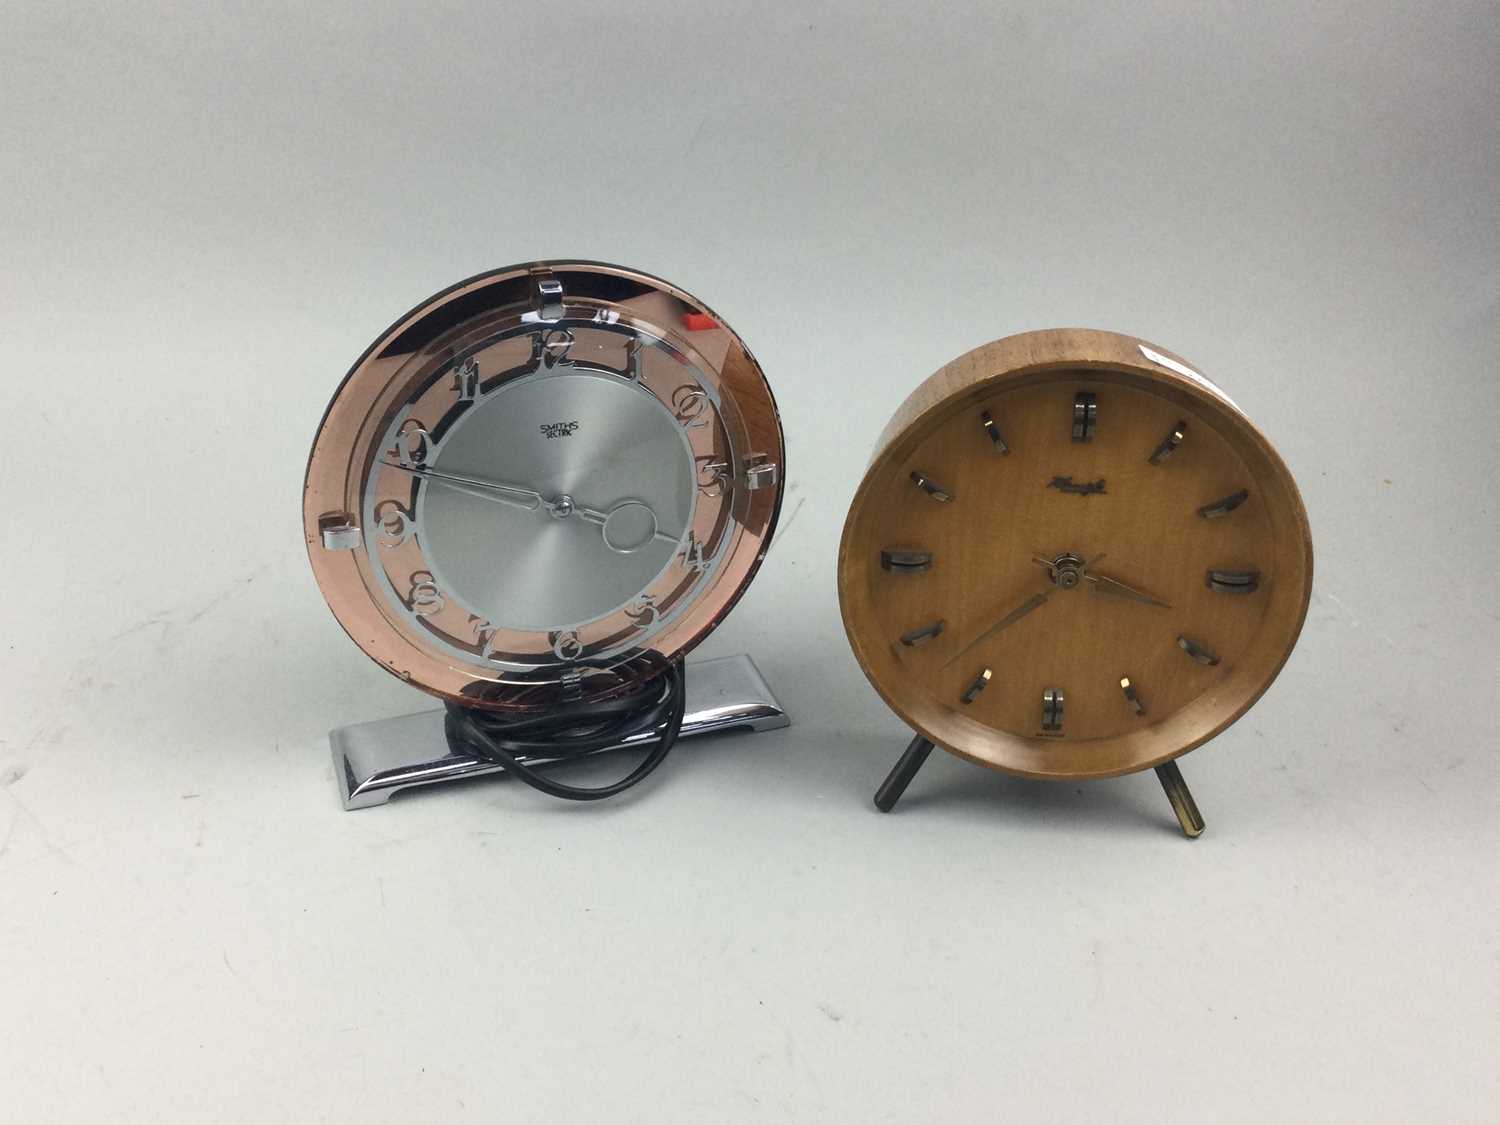 Lot 227 - A SMITHS SECTRIC ELECTRIC CLOCK AND ANOTHER CLOCK